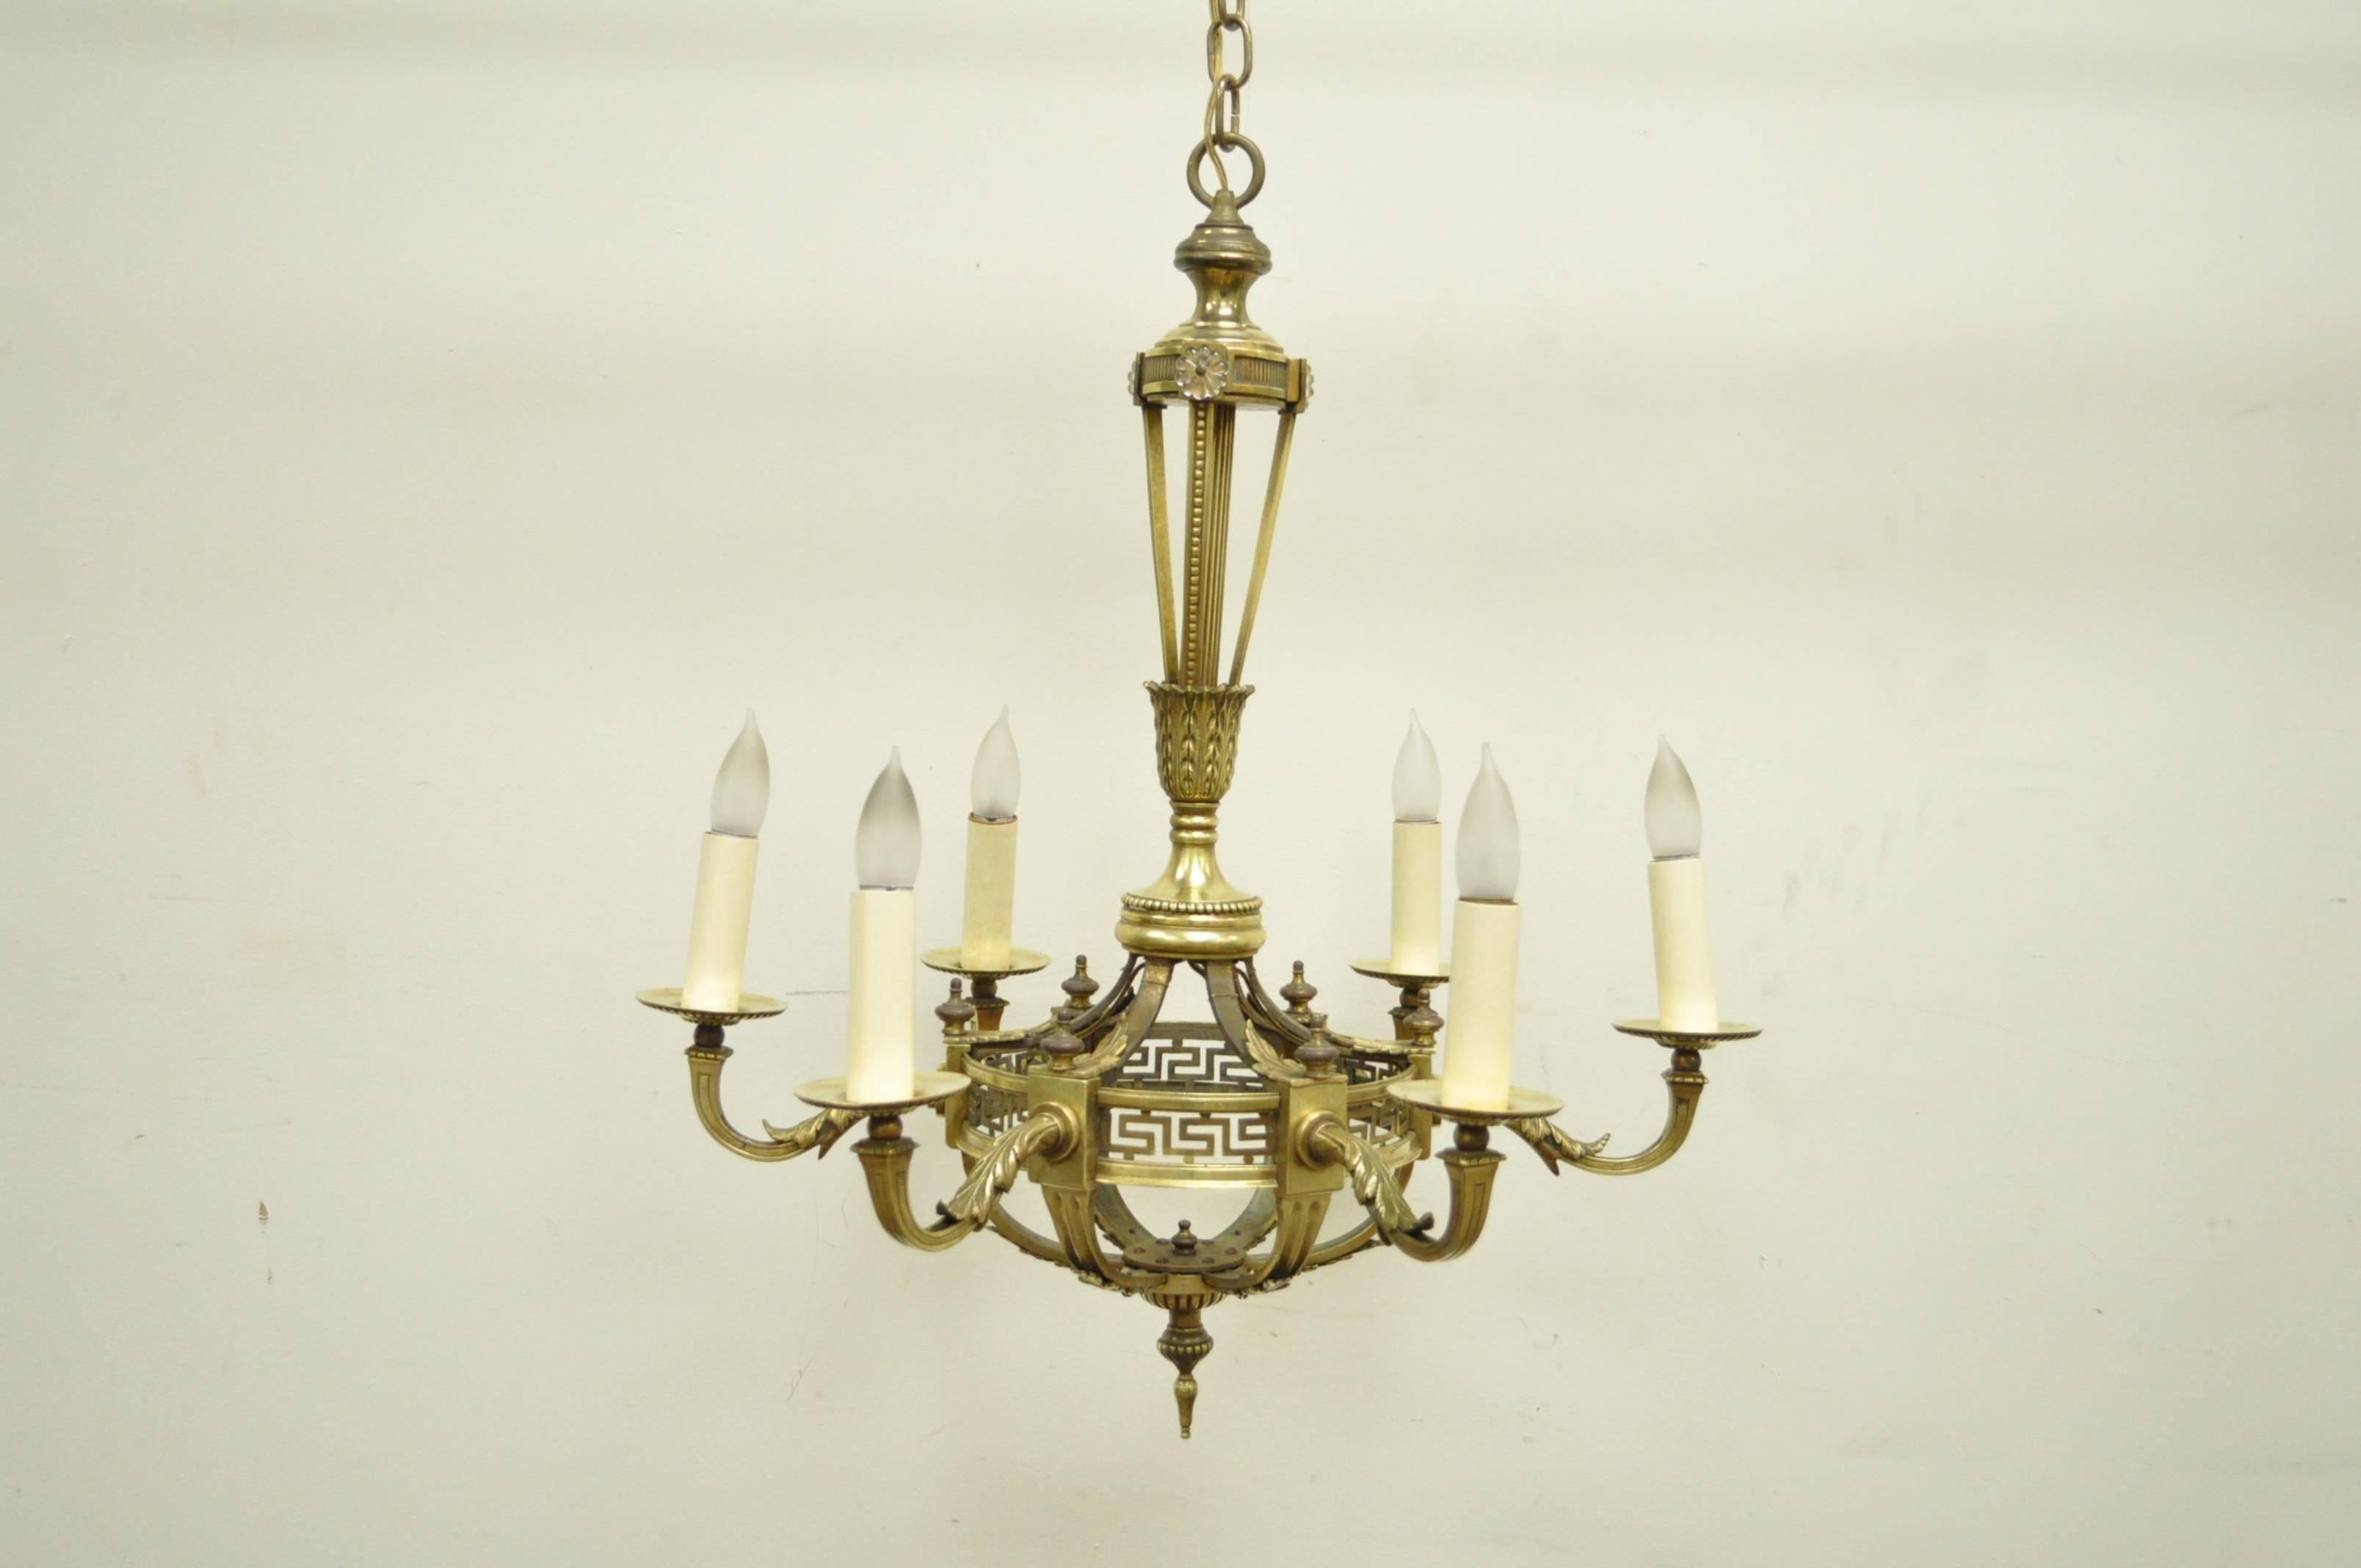 Elegant French neoclassical style, six-light, bronze chandelier. Item features a basket form frame, glass floral medallions at the top of the central shaft, cast bronze acanthus detailing and pierced Greek Key designs around the basket.